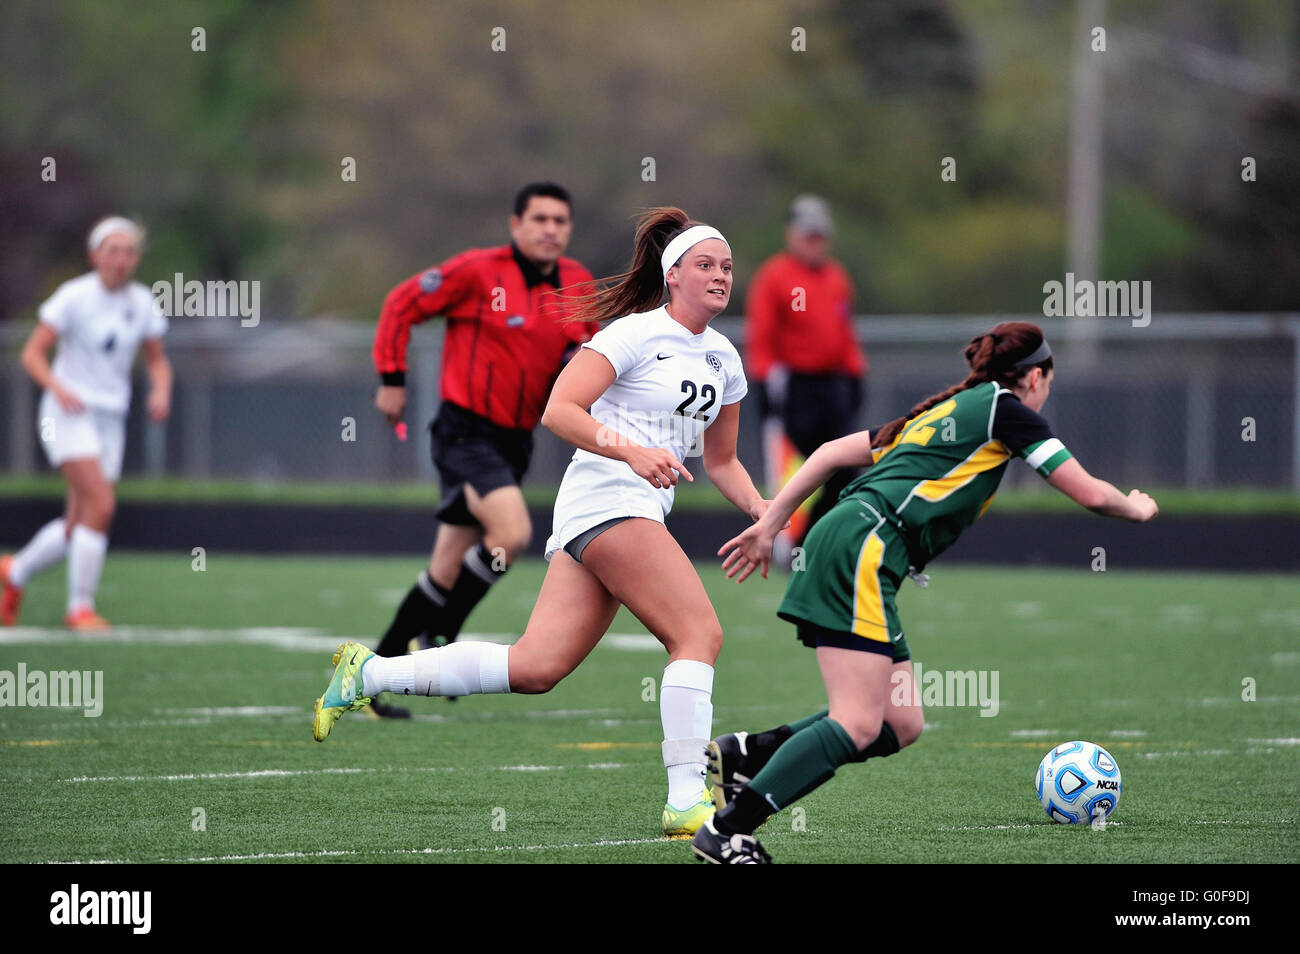 Midfielder dribbling past a defender as she attempts to set up a scoring opportunity for her team during a high school match. USA. Stock Photo